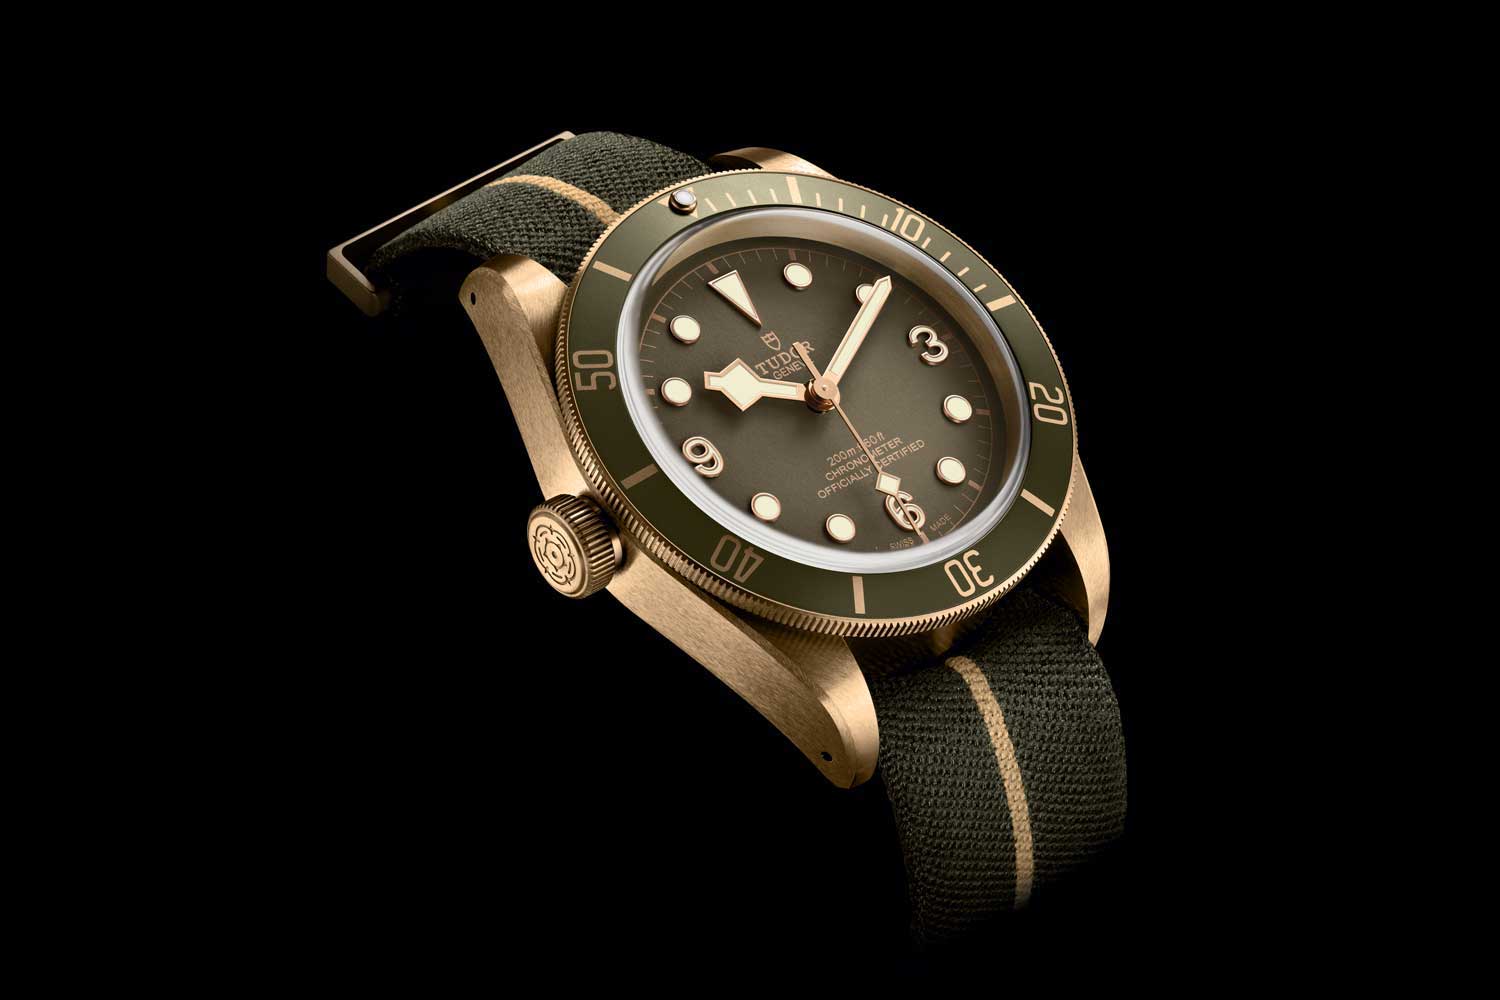 Tudor Black Bay Bronze One sold for CHF 350,000 at Only Watch 2017